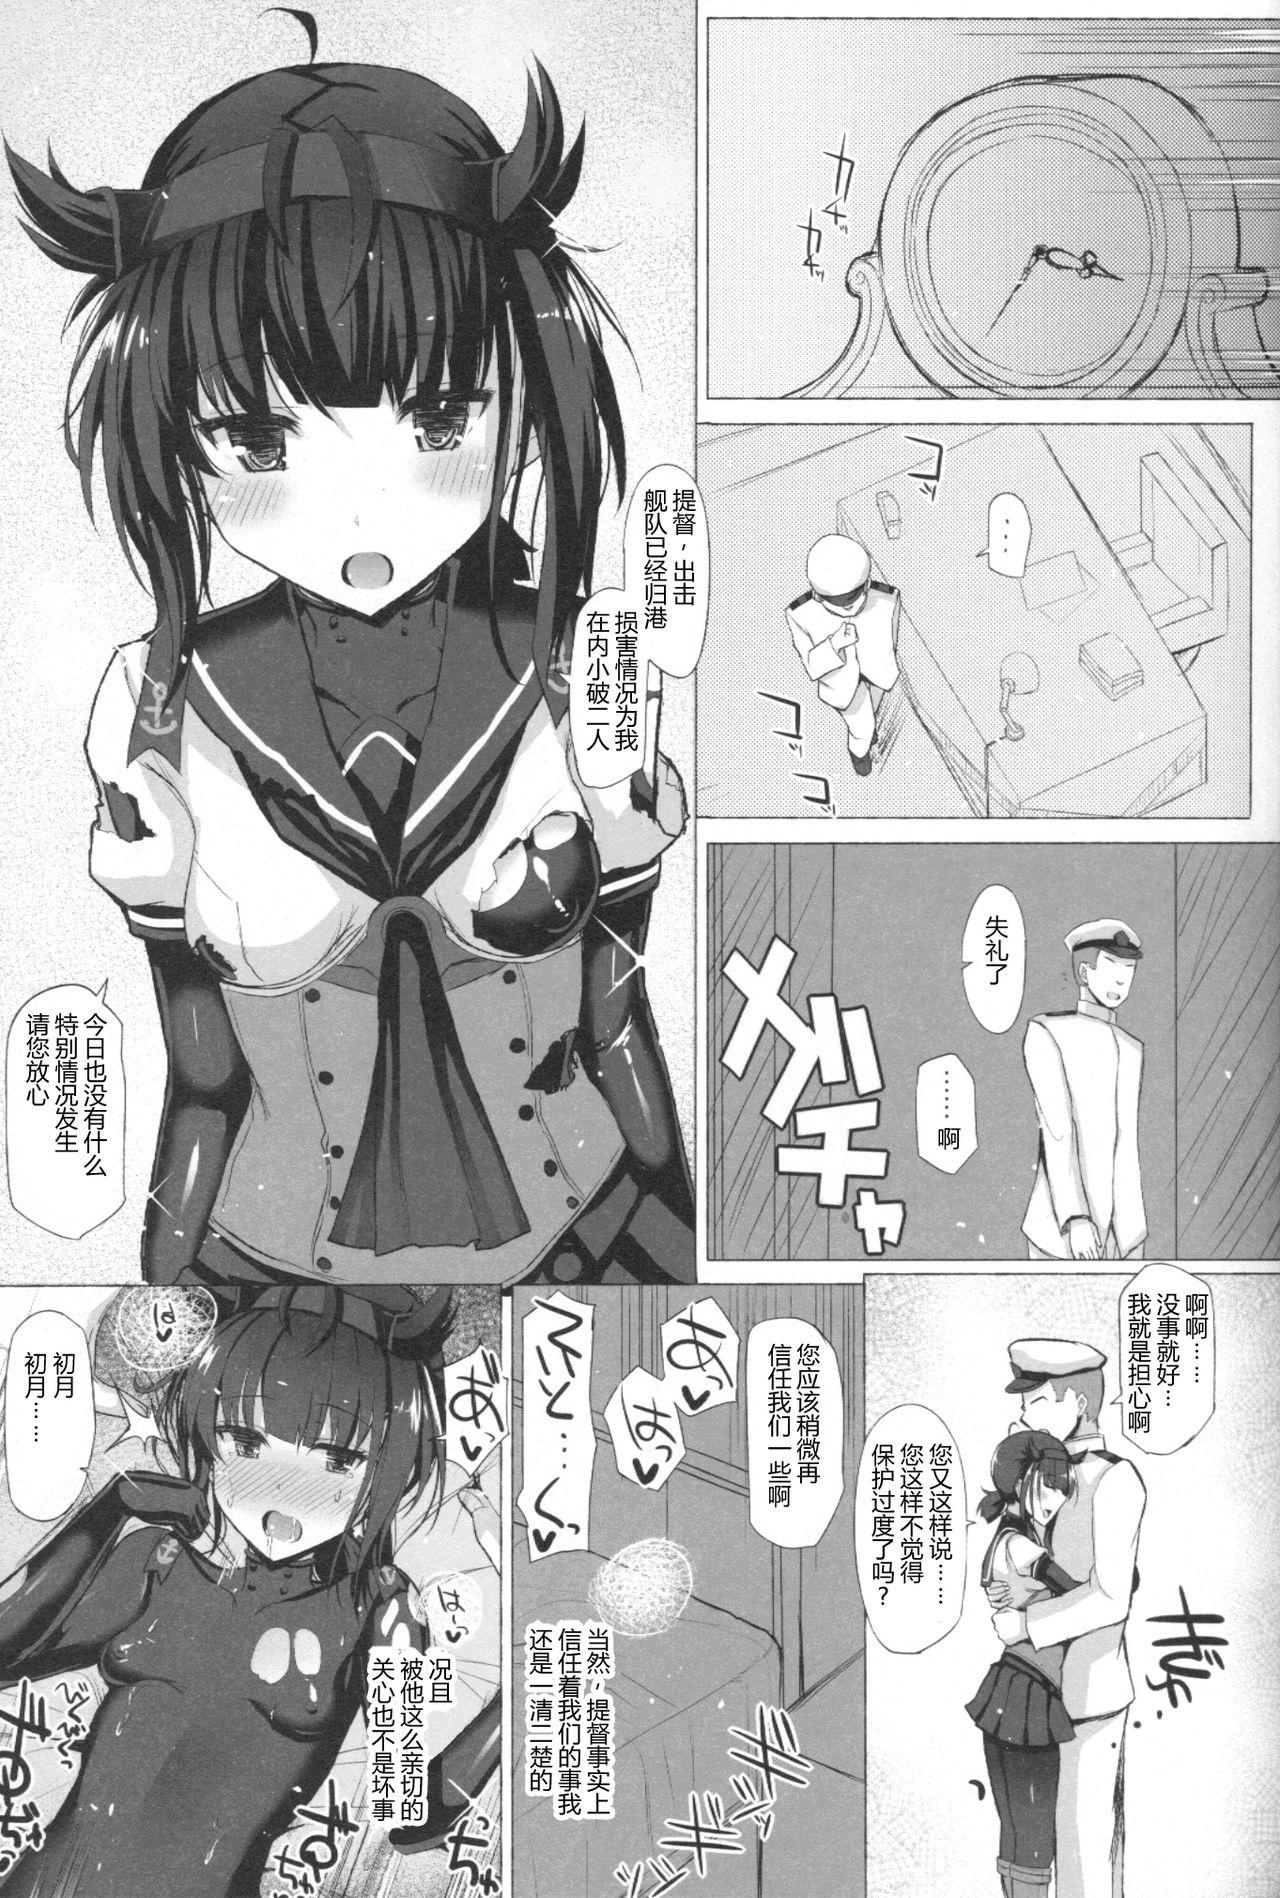 Gordita LOVE IS THE DRUG - Kantai collection Orgasms - Page 2